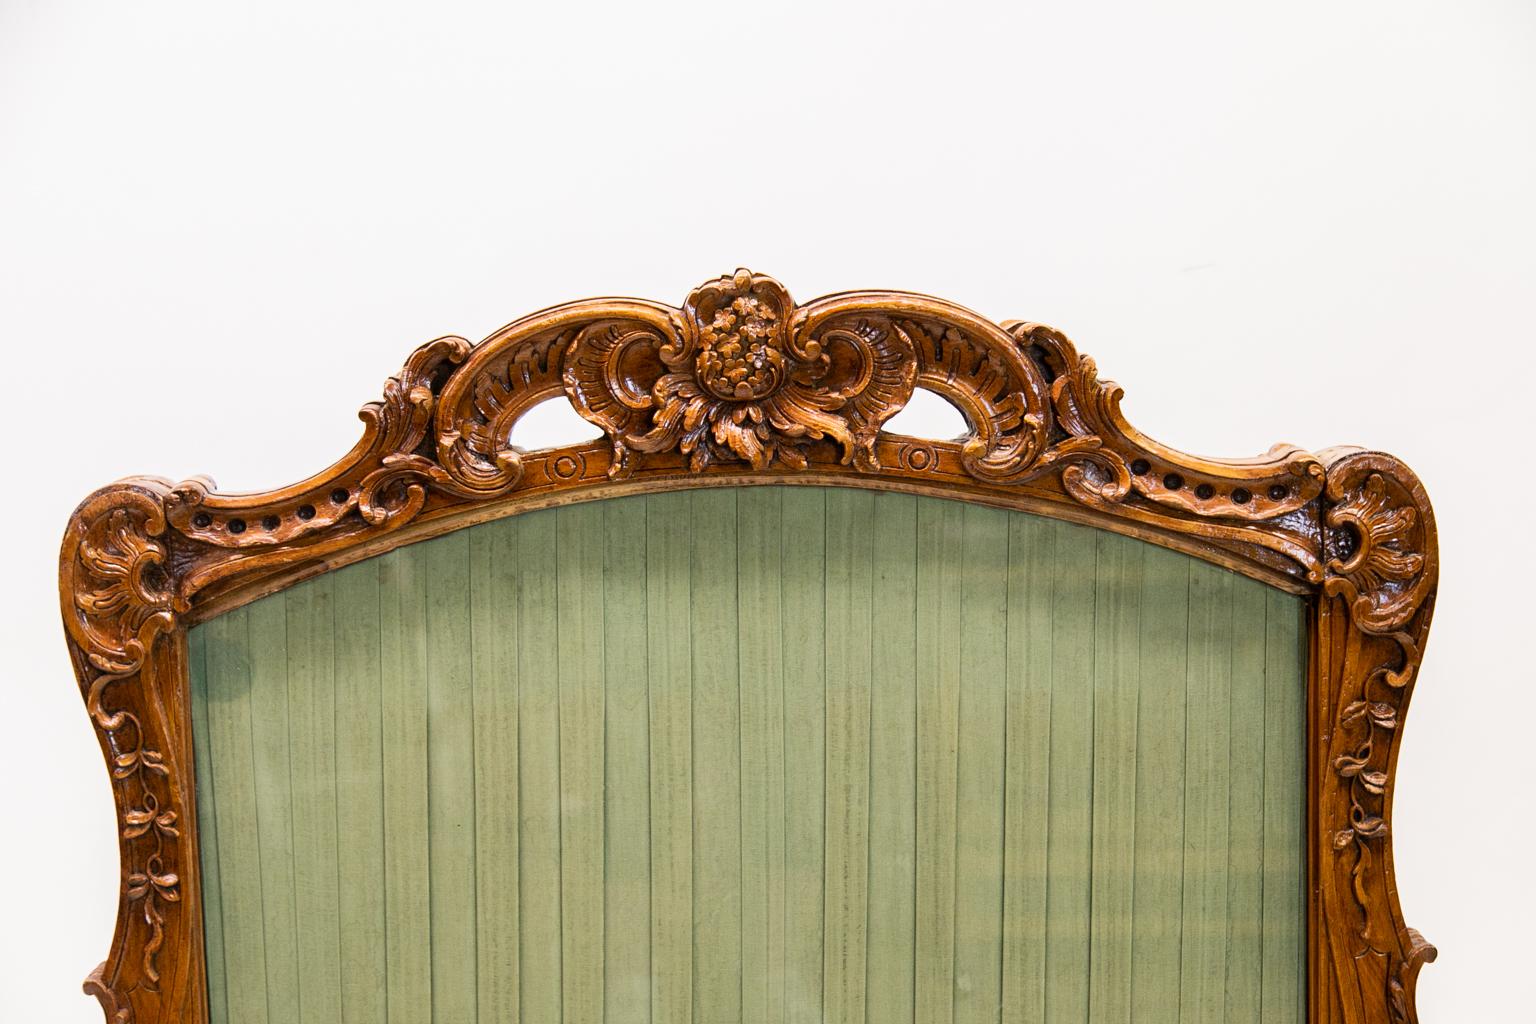 This carved French fire screen is carved on the front and back with identical carvings of floral and arabesques designs. The front and back legs terminate in scrolled feet. The central panel as a pleated green fabric with protective glass on the